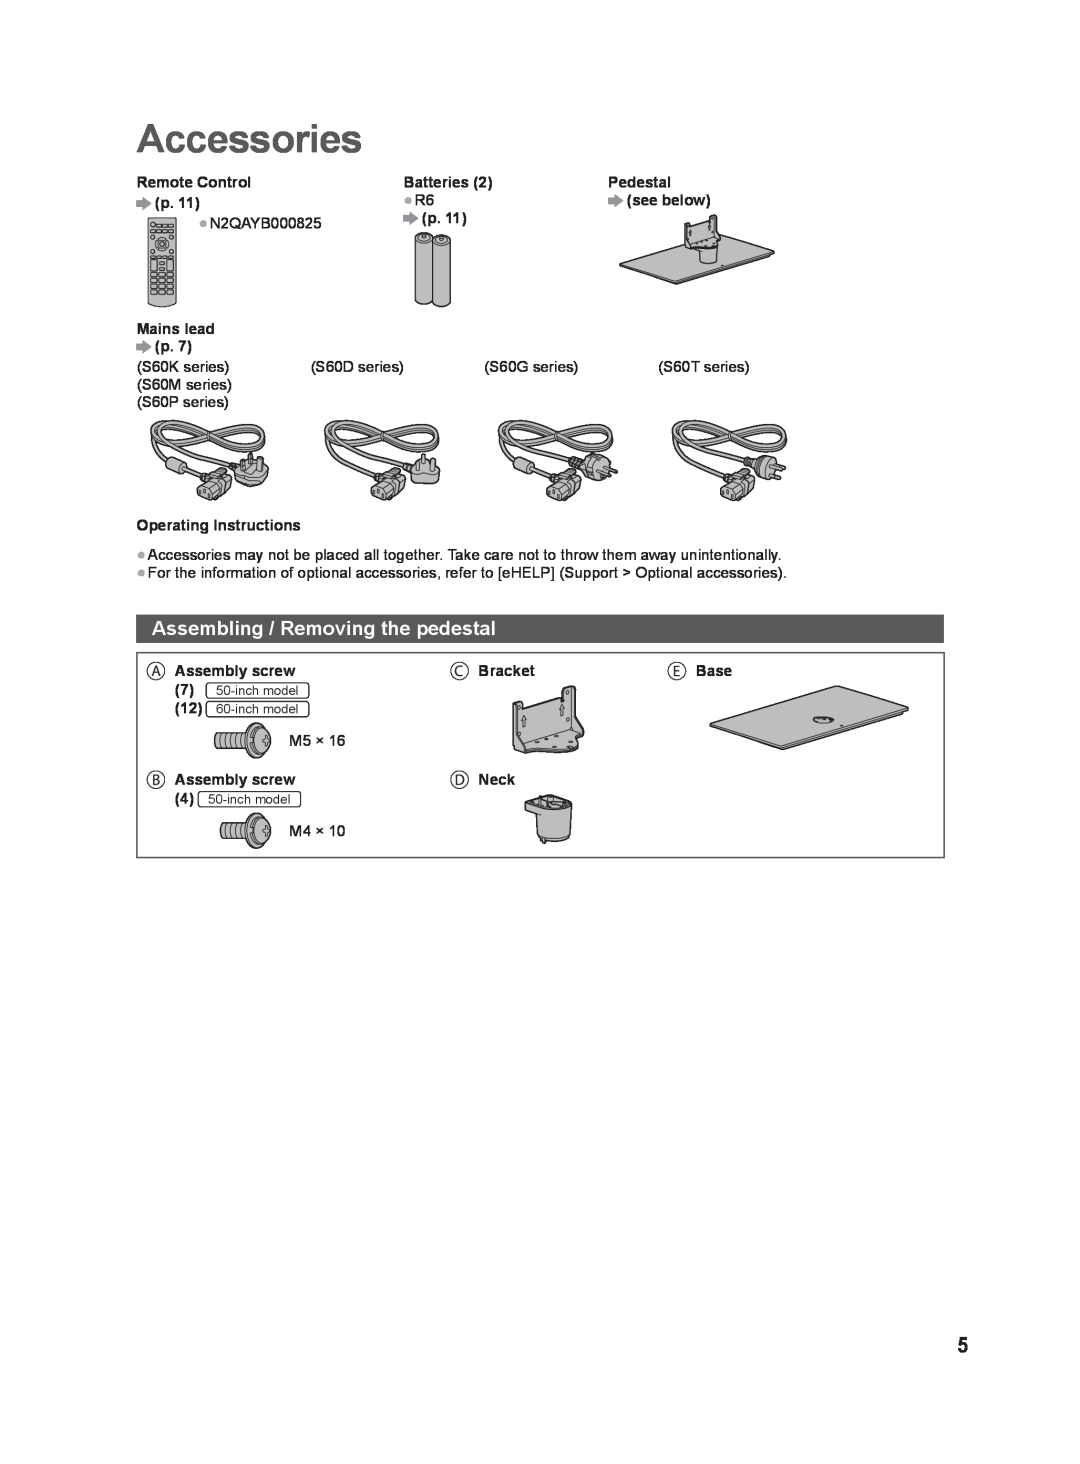 Panasonic S60K, S60M, S60D, S60G, S60P, S60T operating instructions Accessories, Assembling / Removing the pedestal 